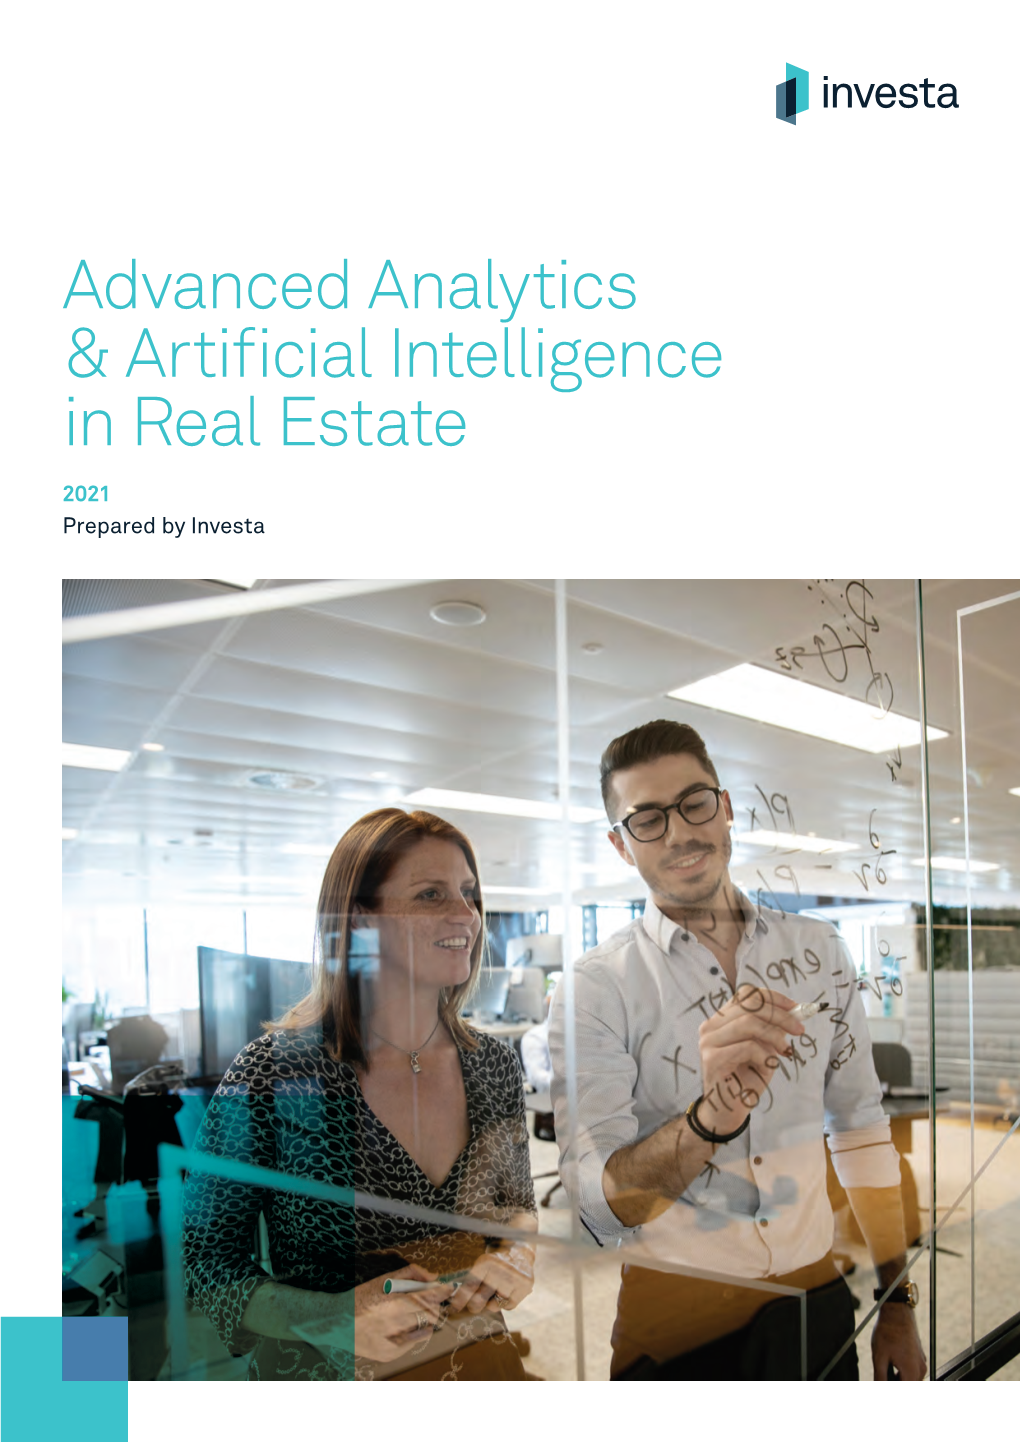 Advanced Analytics & Artificial Intelligence in Real Estate